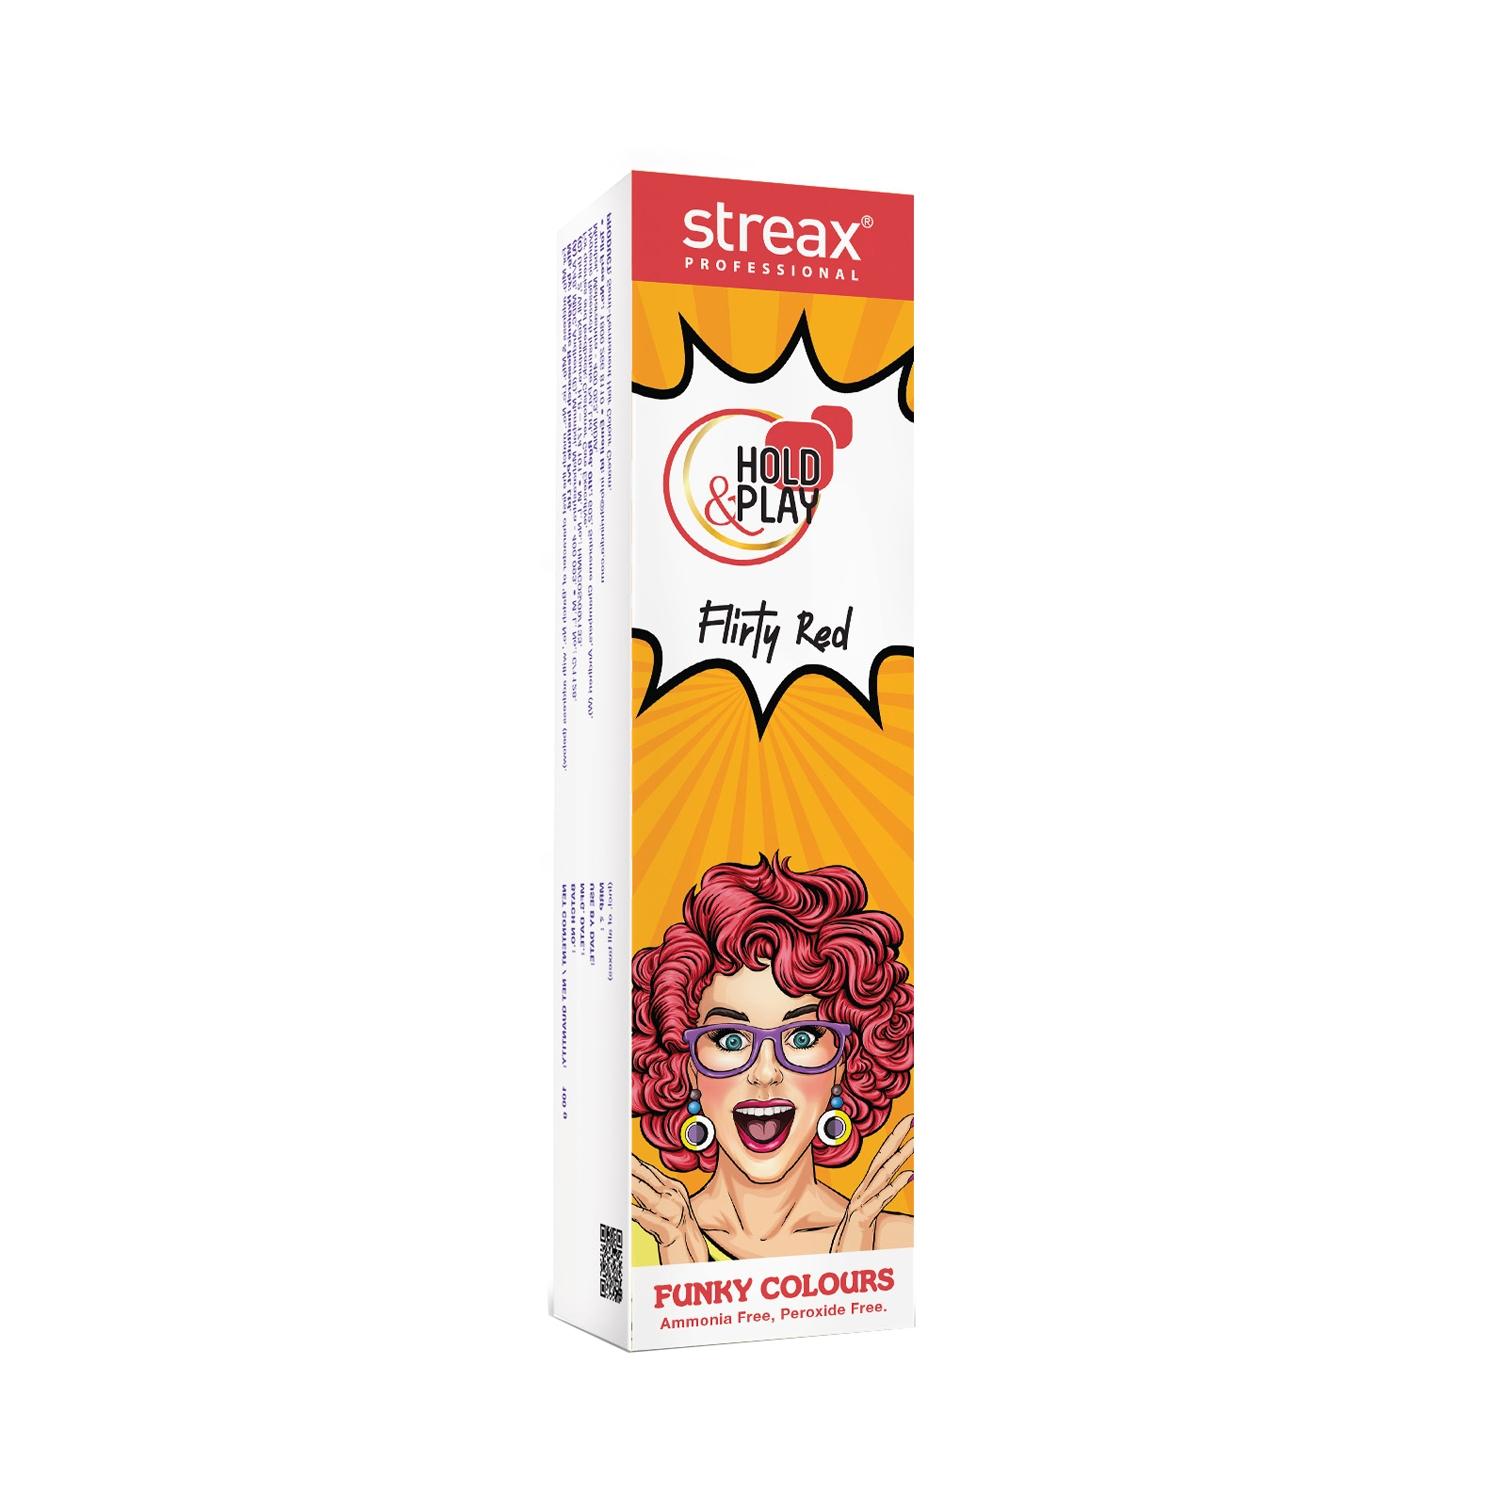 streax professional hold & play funky hair color - flirty red (100g)